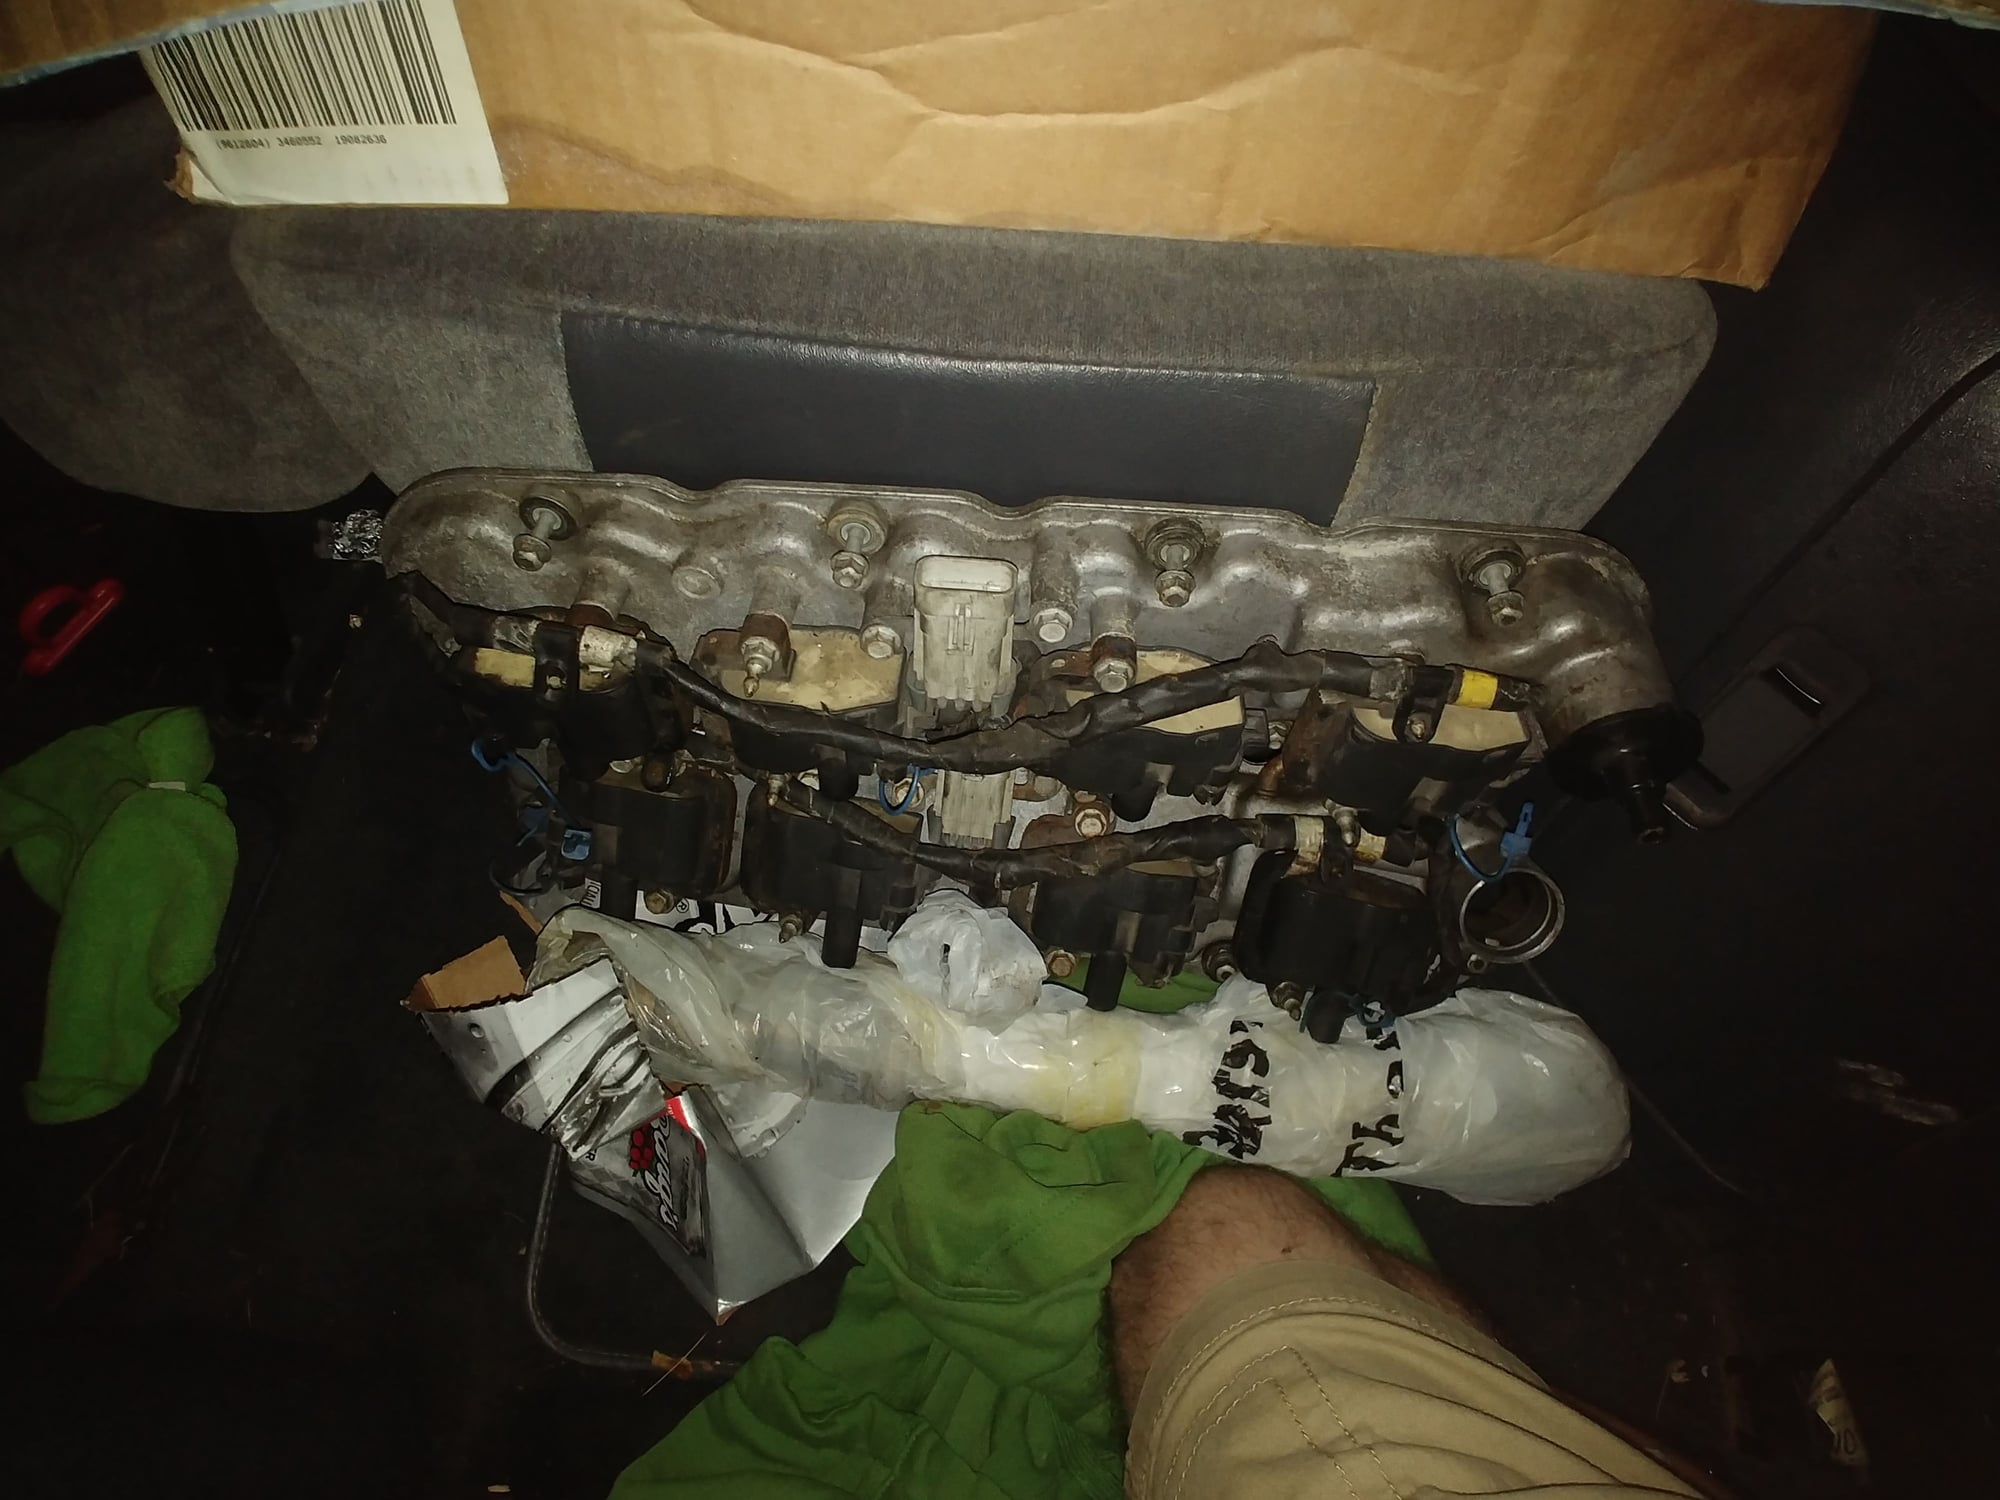 1998 Chevrolet Camaro - 806 heads - rebuildable - Engine - Internals - $100 - Clifton Springs, NY 14432, United States